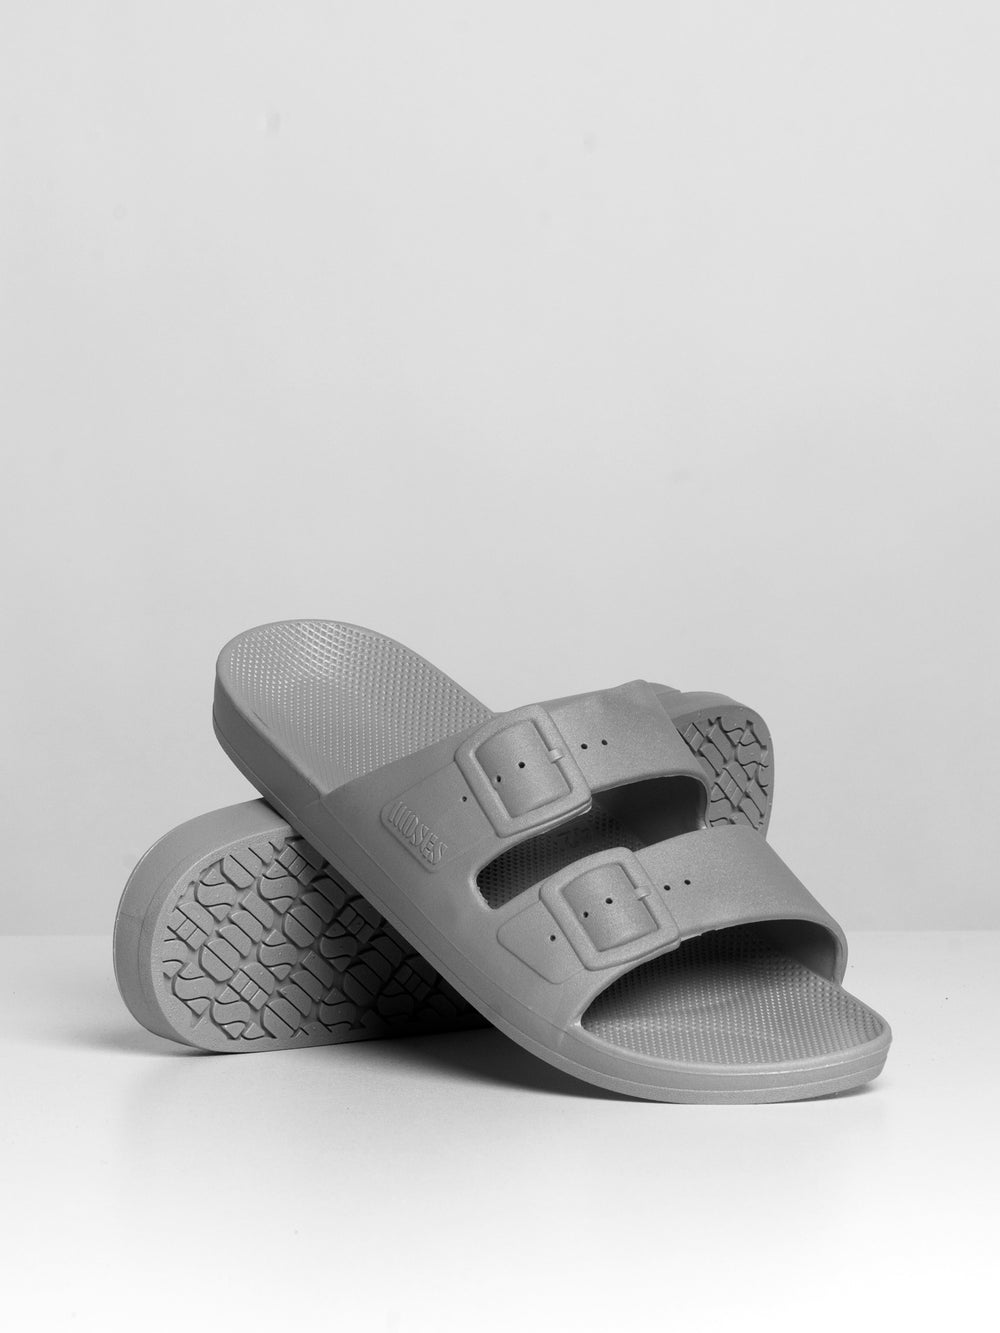 MENS FREEDOM MOSES FREEDOM GREY SANDAL - CLEARANCE